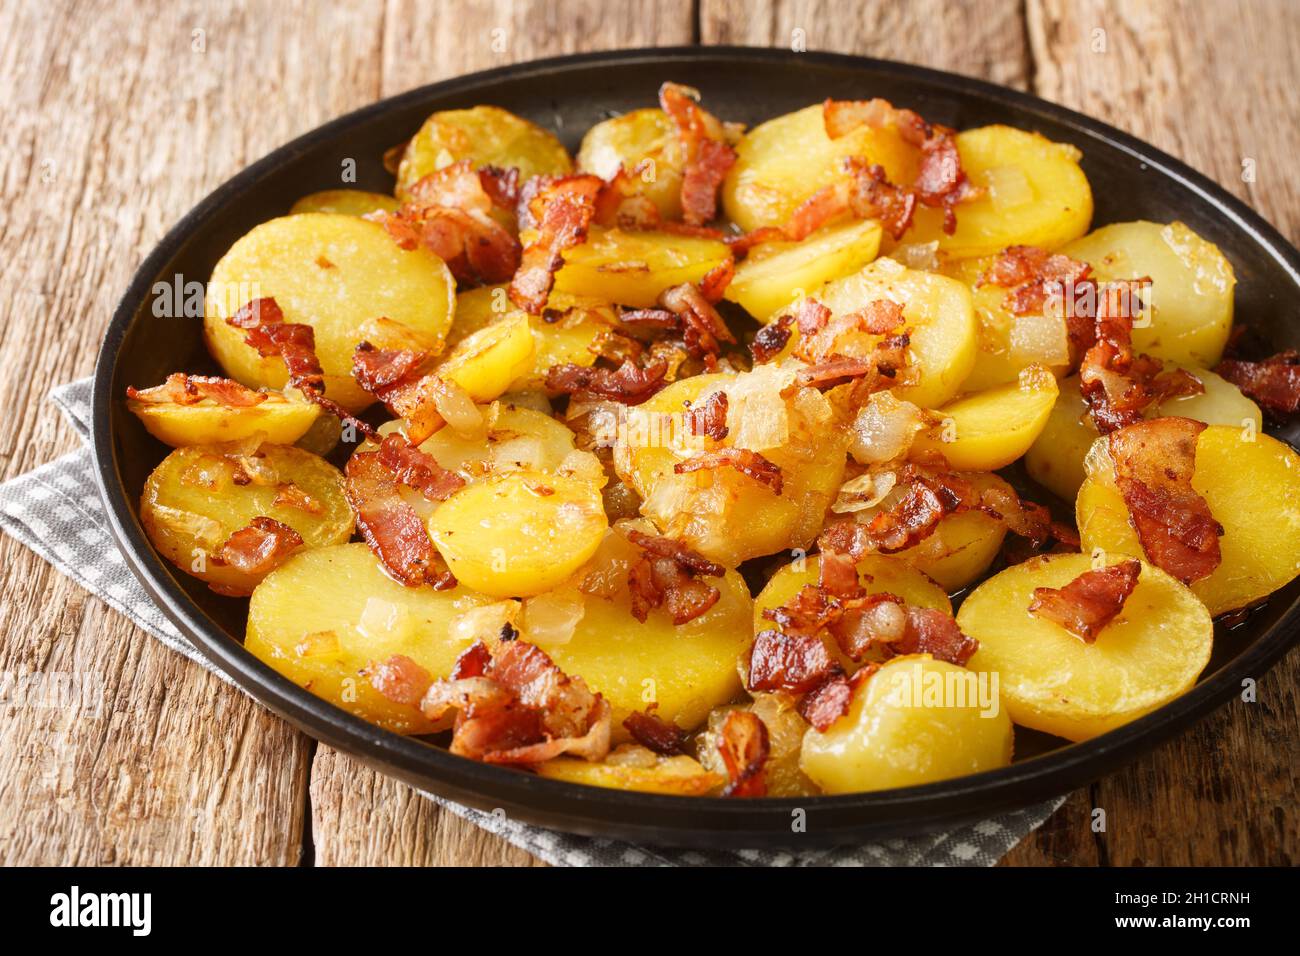 Bratkartoffeln German Cottage Fries With Bacon and Onion close up in the plate on the table. Horizontal Stock Photo